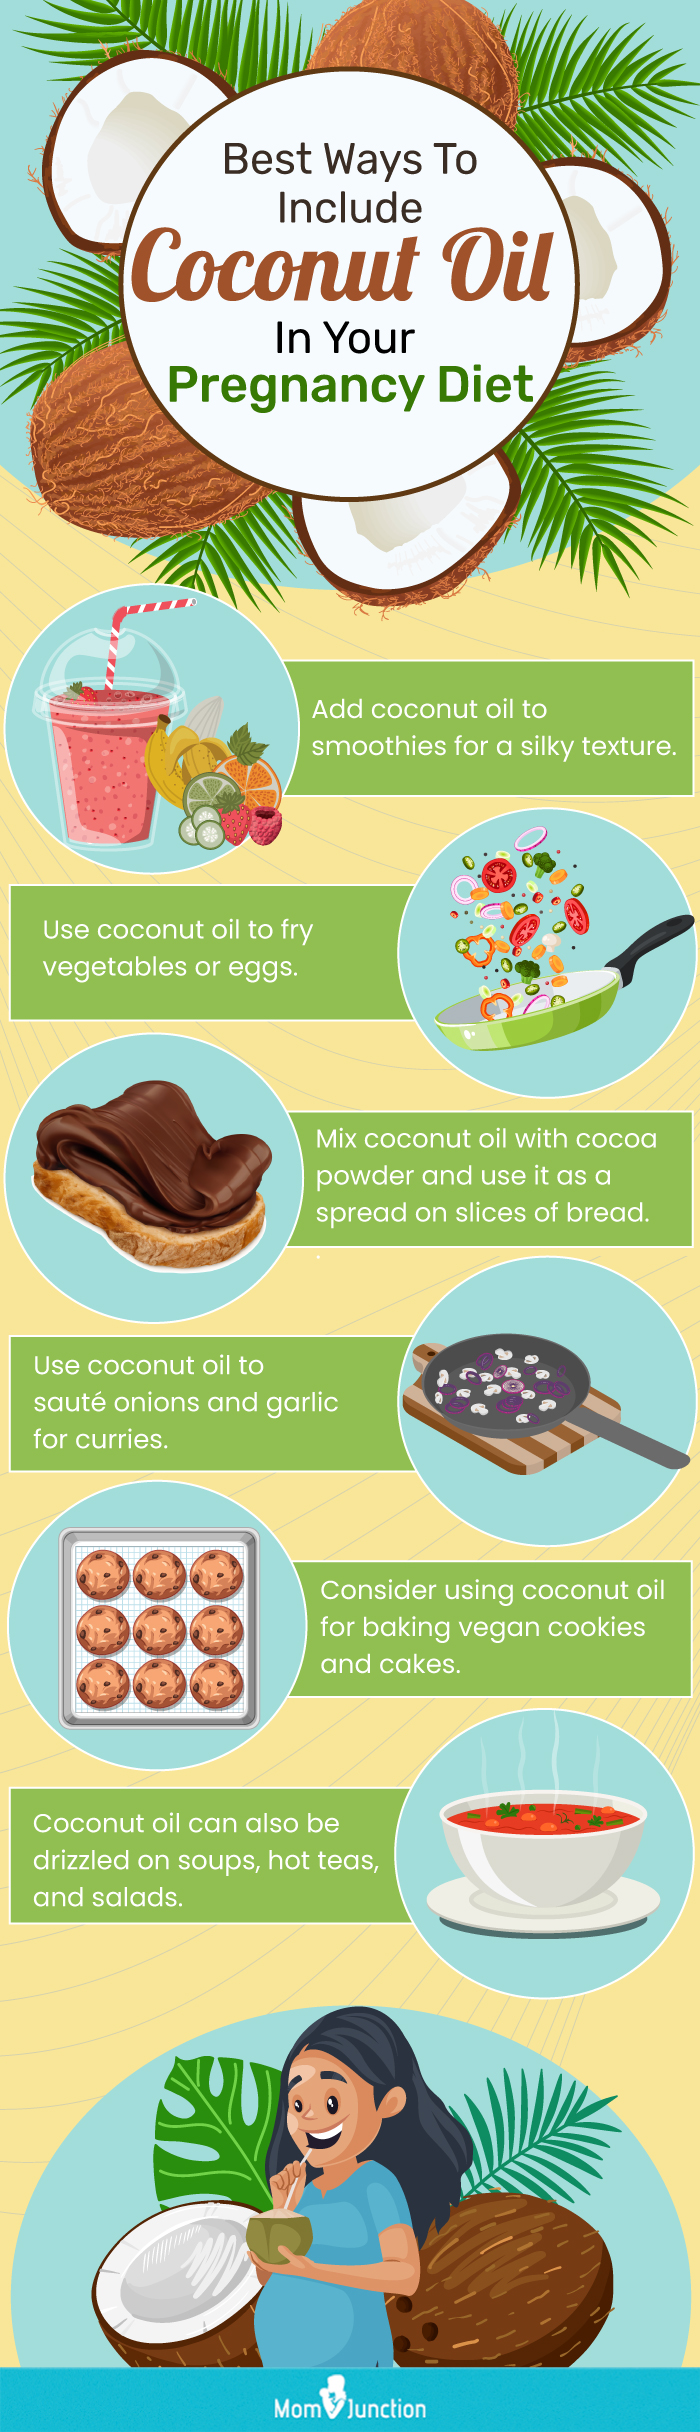 easy ideas to include coconut oil in your diet (infographic)